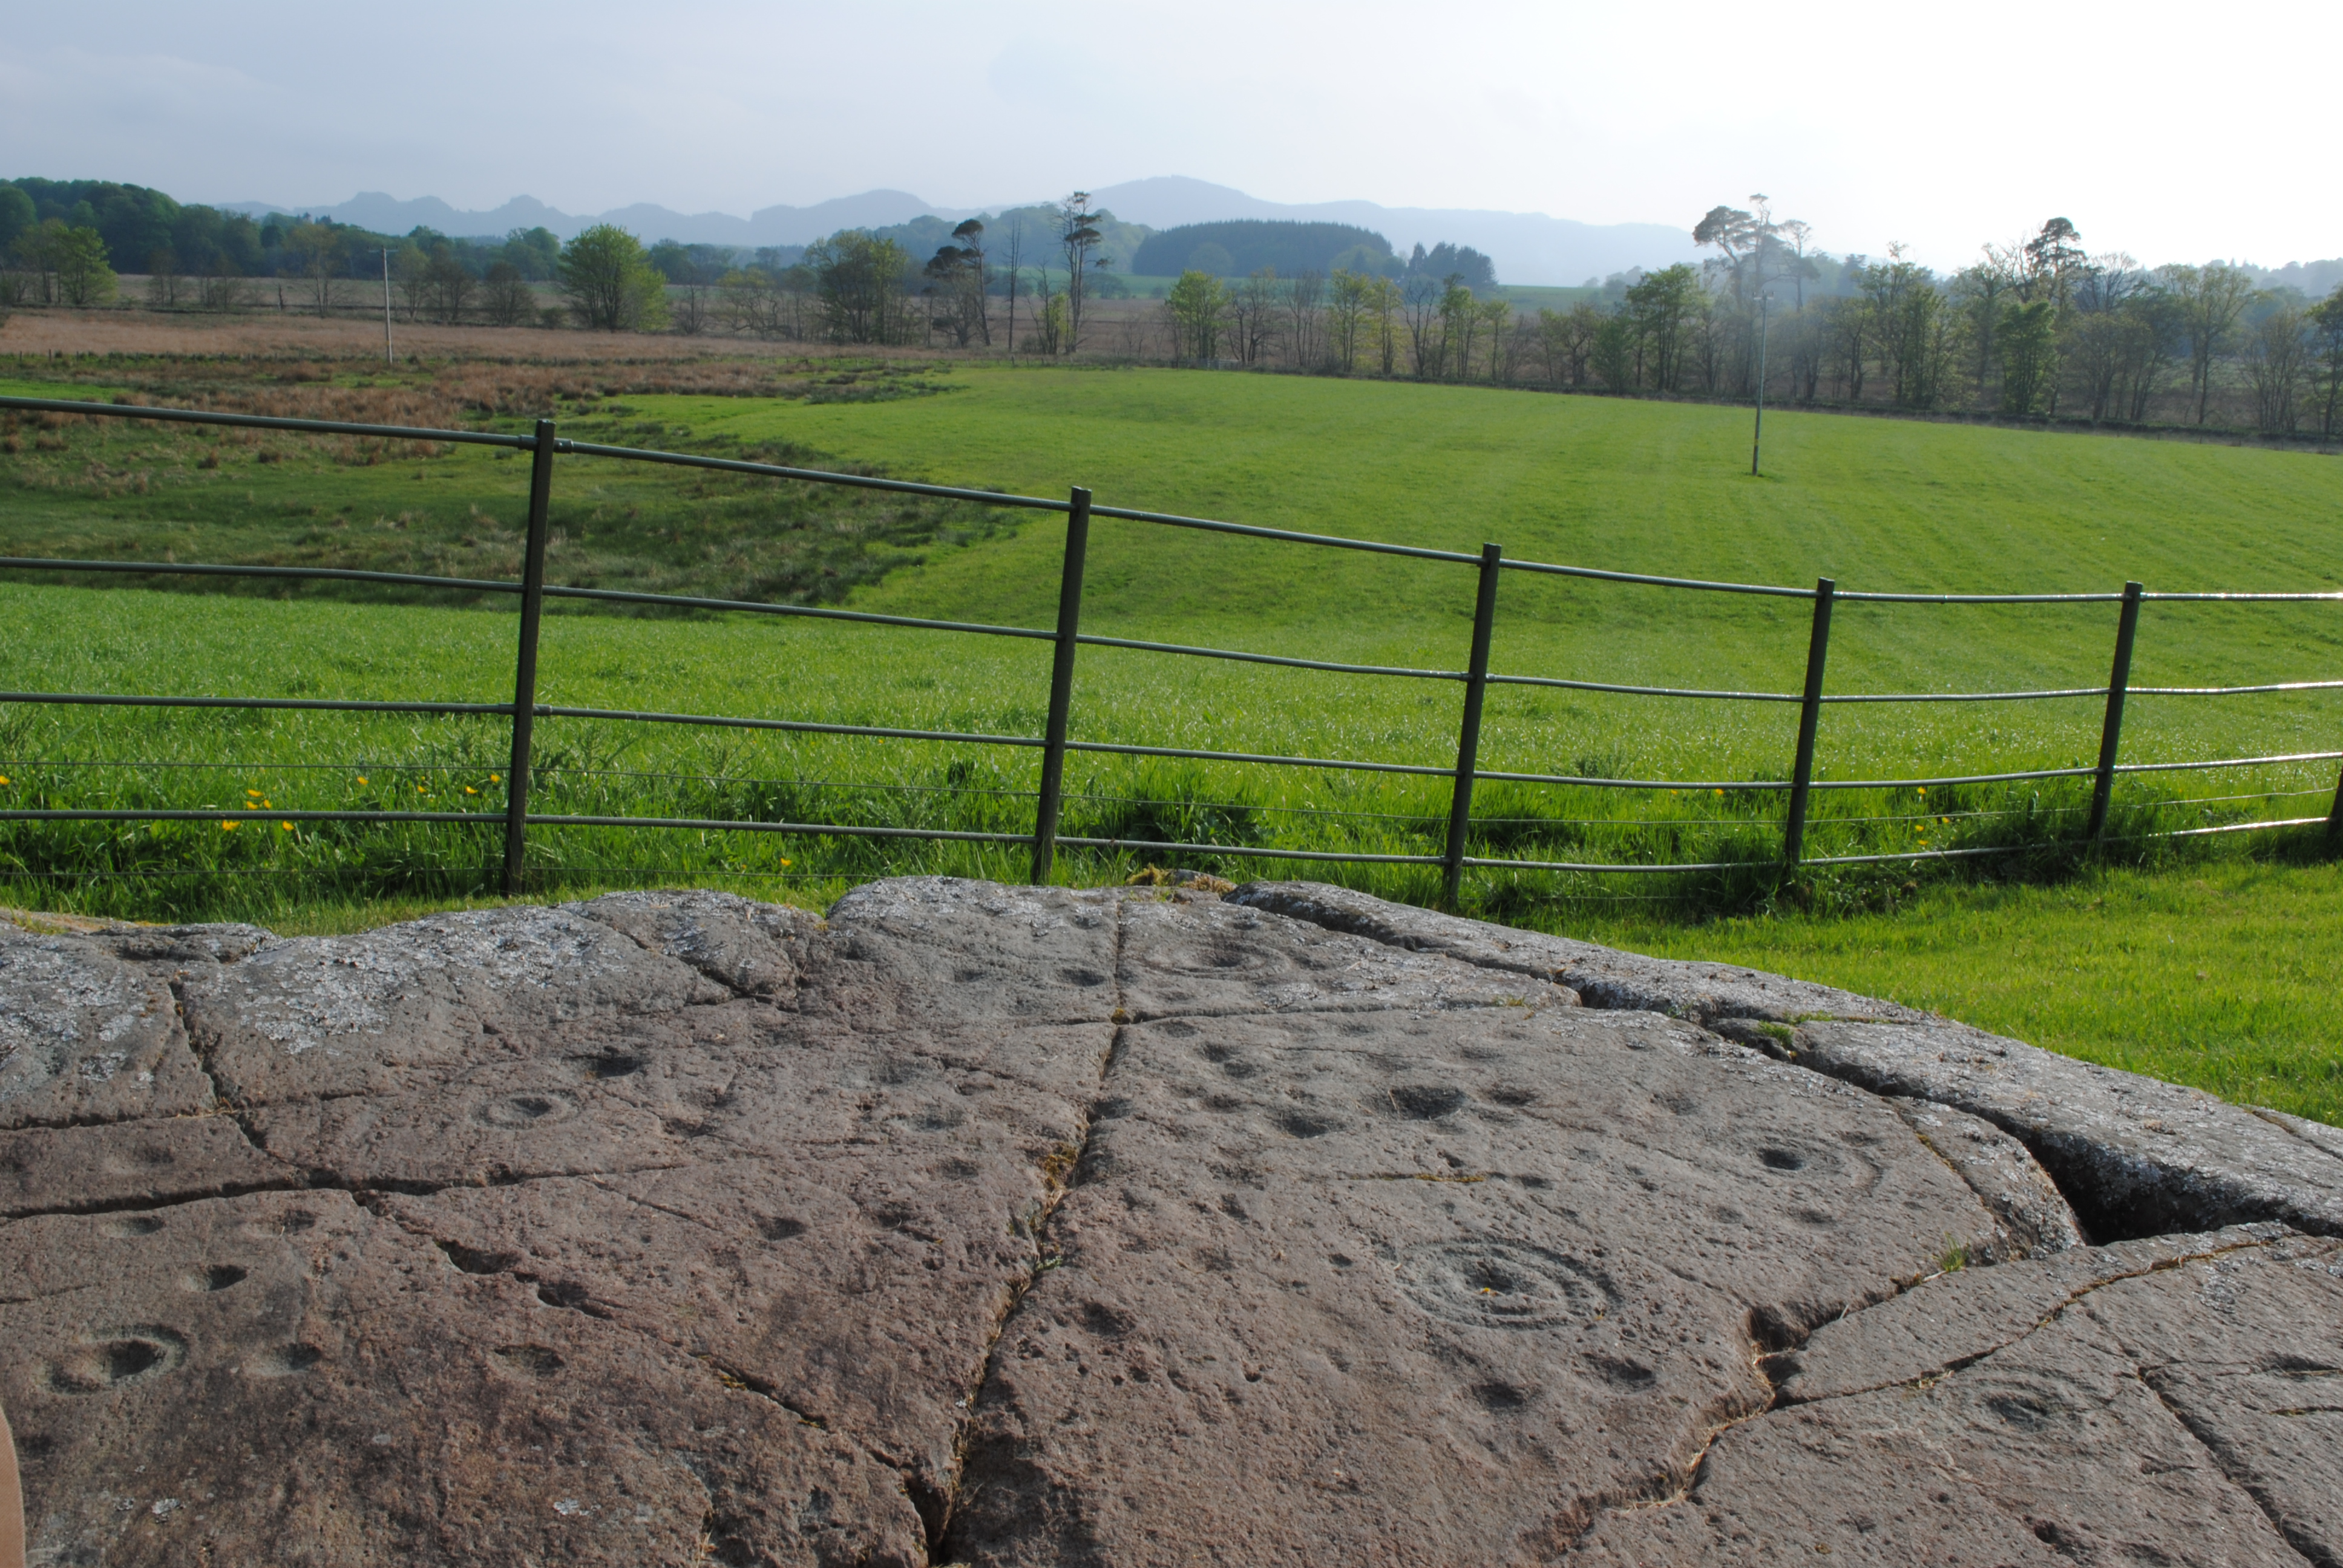 Burial rites, location of megalithic monuments and rock art of the Kilmartin Valley, Argyll, Western Scotland Stage 1 of the Motifs and Monuments Project